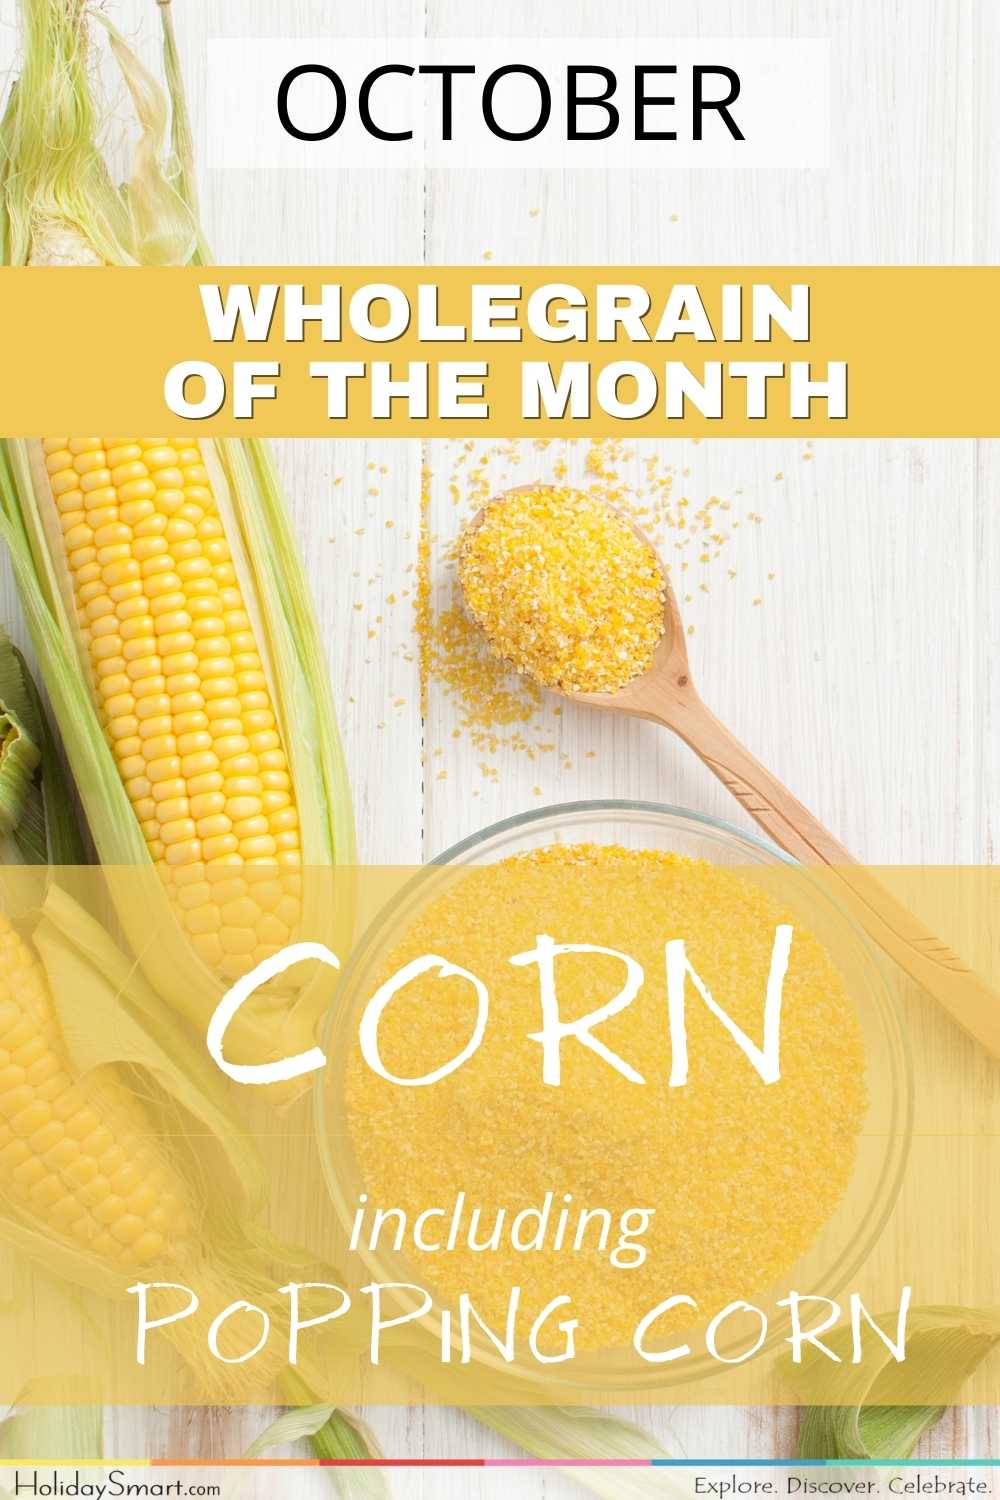 October is Corn Month